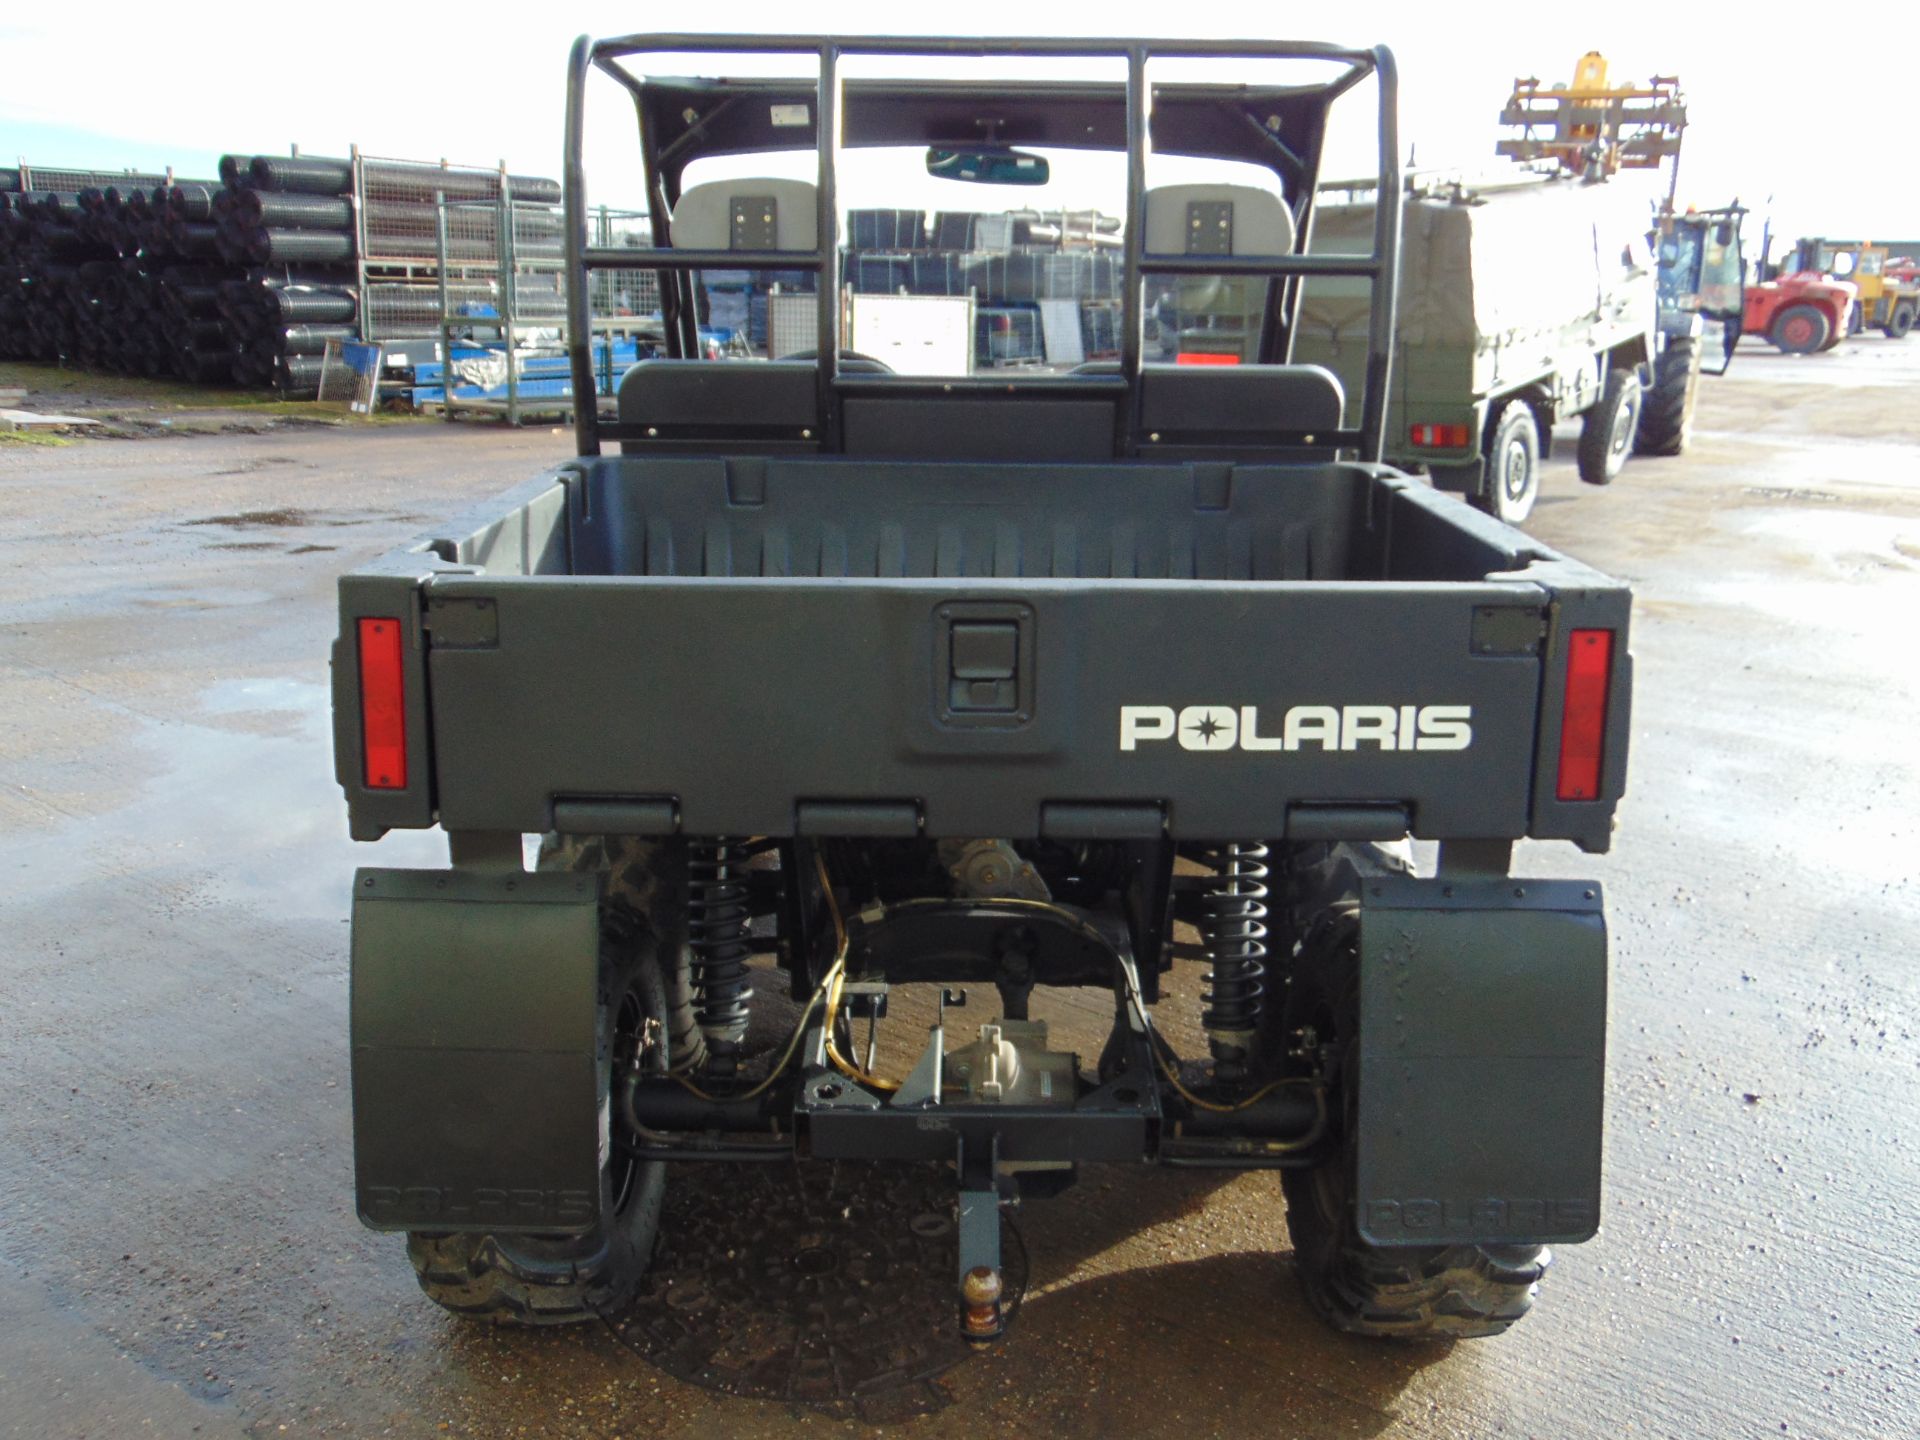 Polaris 6x6 800 EFI Ranger Utility Vehicle ONLY 280 HOURS from Govt Dept - Image 5 of 19